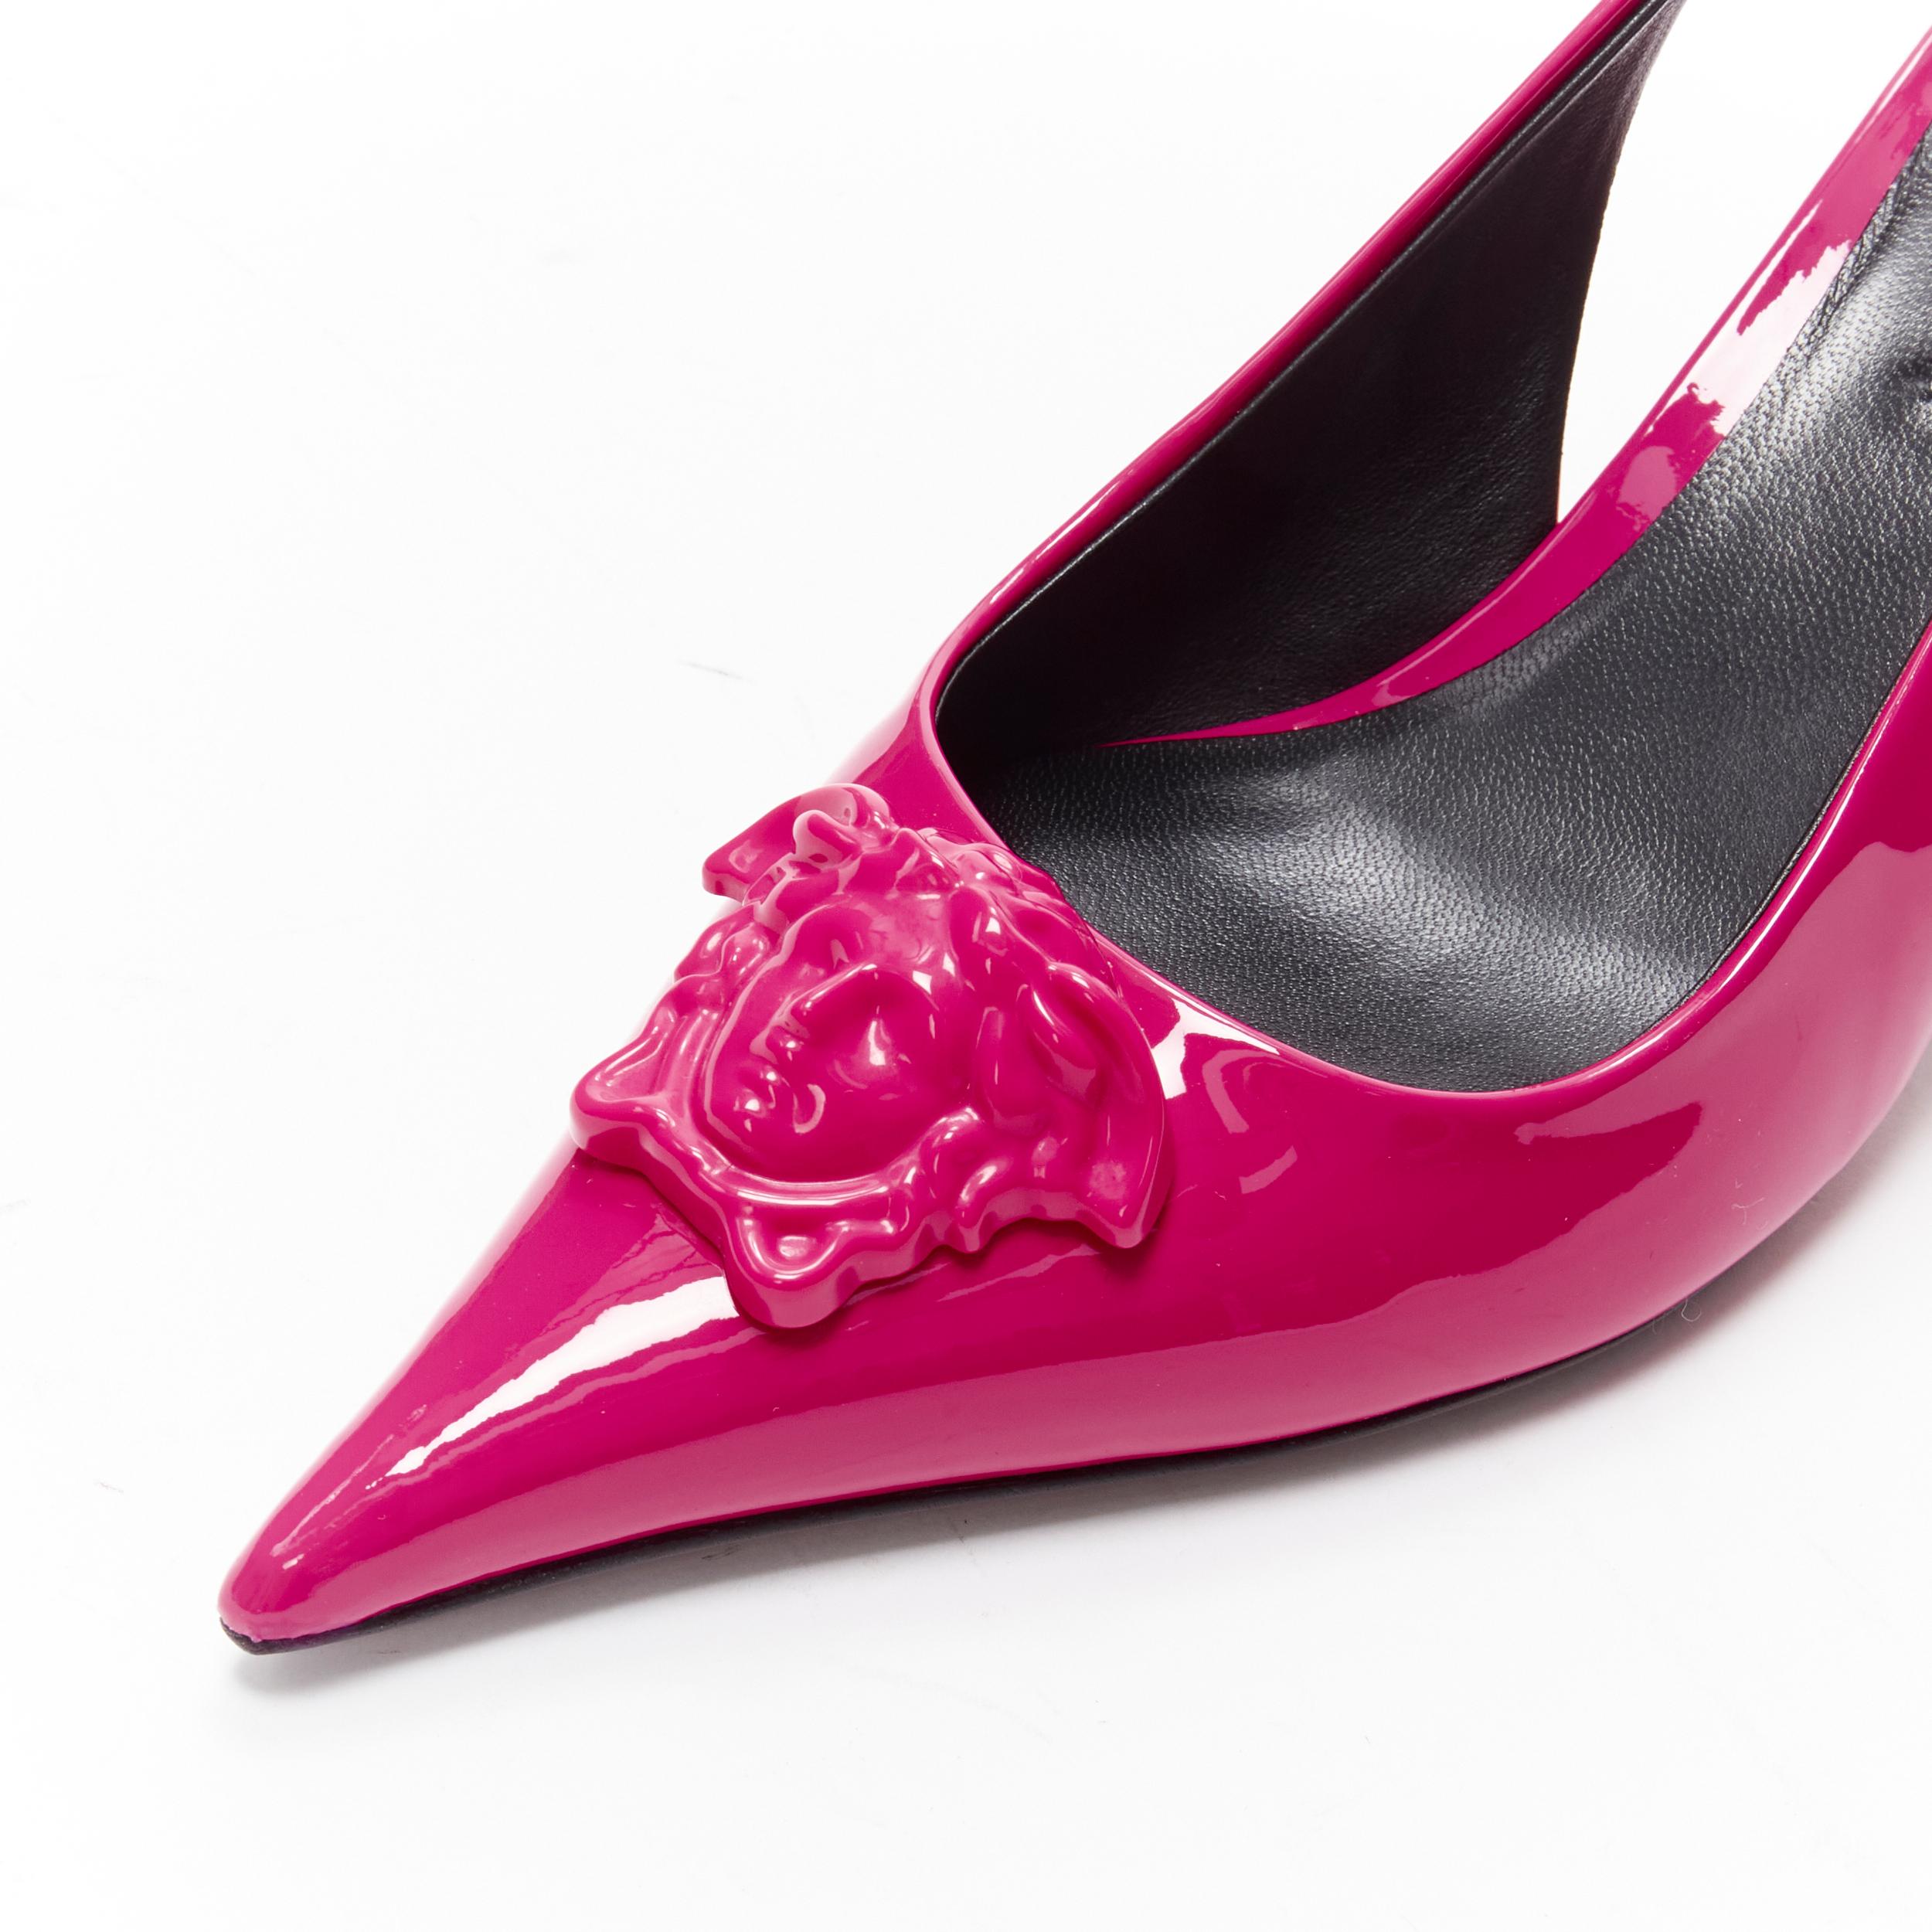 new VERSACE Palazzo Medusa fuscia pink sling kitteh heel pointed toe pump EU37

Reference: TGAS/C01780

Brand: Versace

Designer: Donatella Versace

Model: DST638H D2VE 1P660

Material: Leather

Color: Black

Pattern: Solid

Estimated Retail Price: